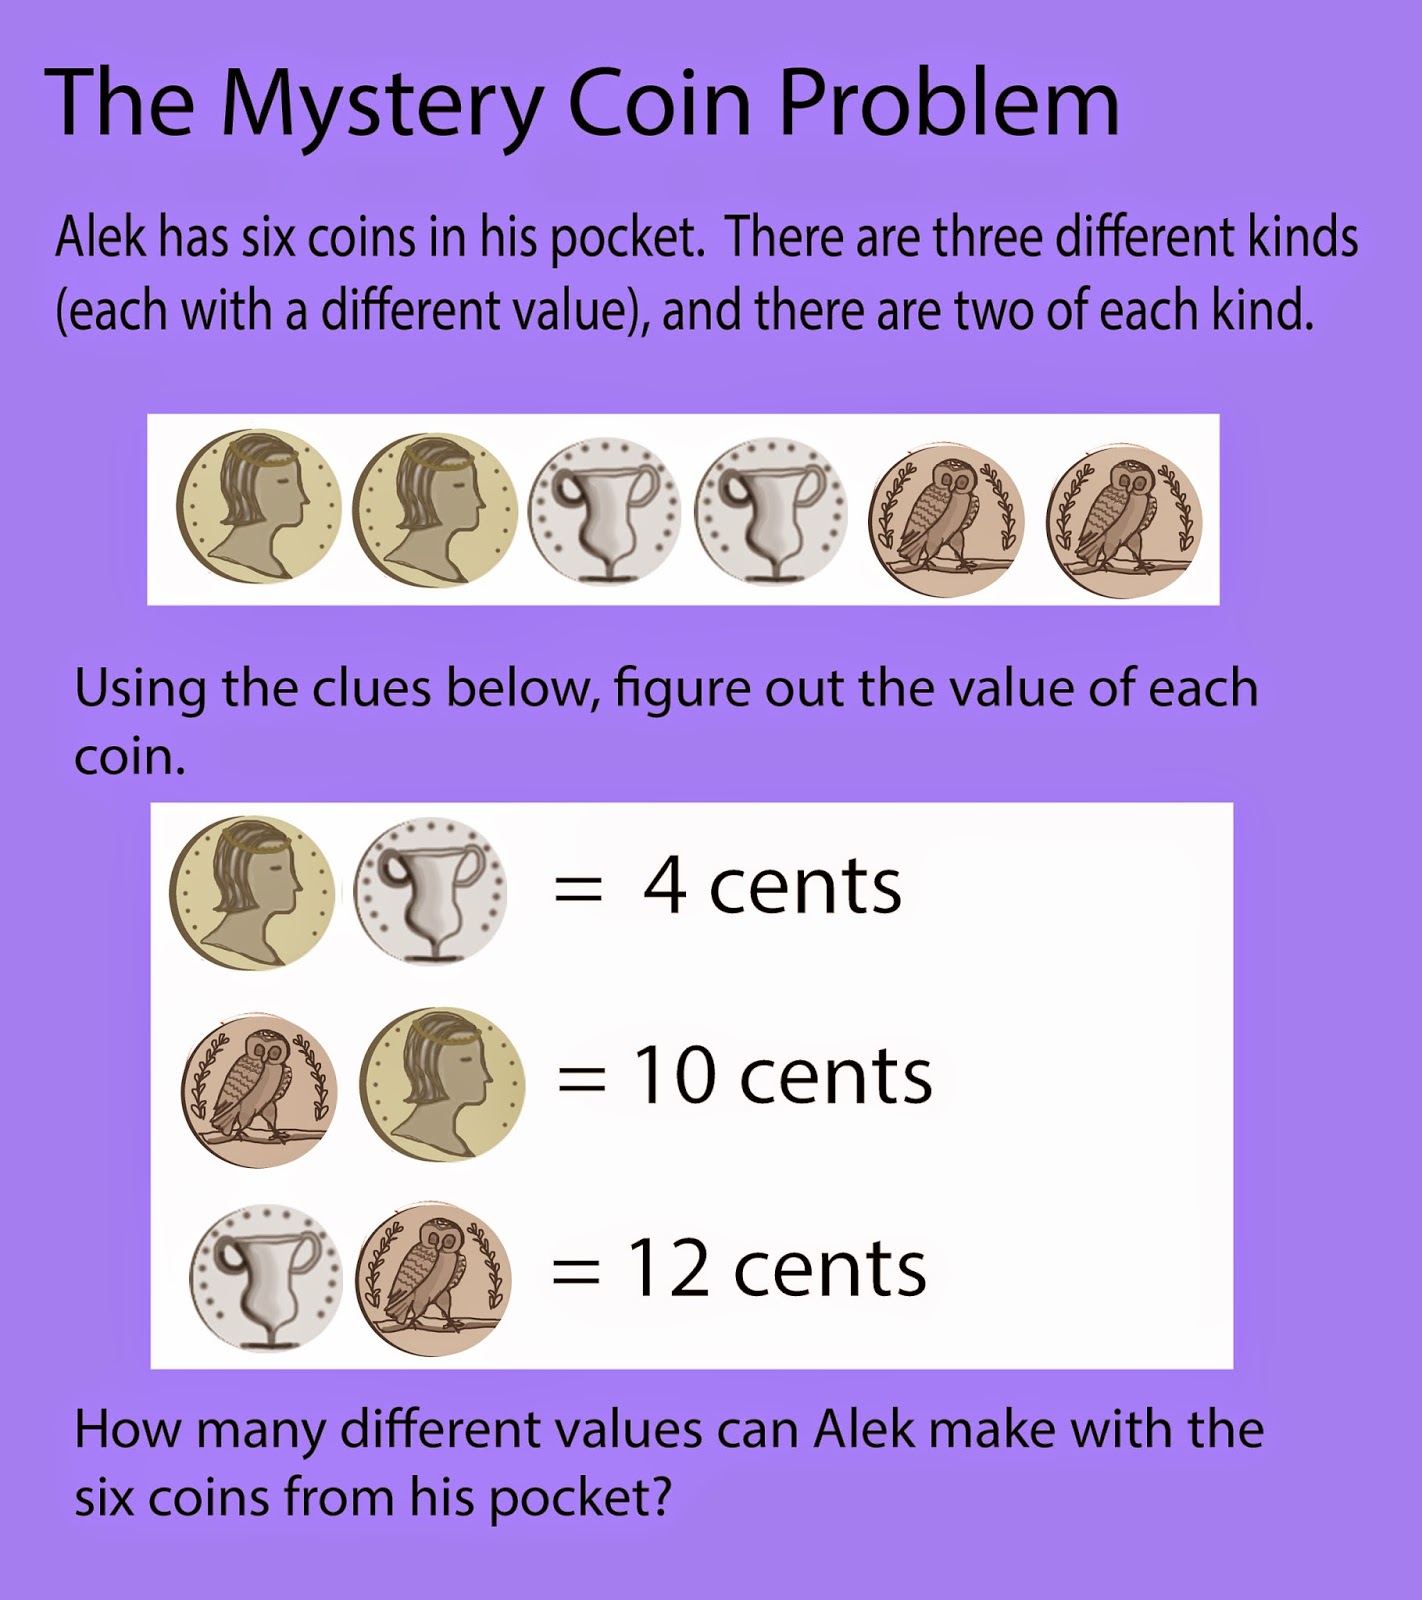 mathematics - 1 Fake Coin among N Amount of coins - Puzzling Stack Exchange